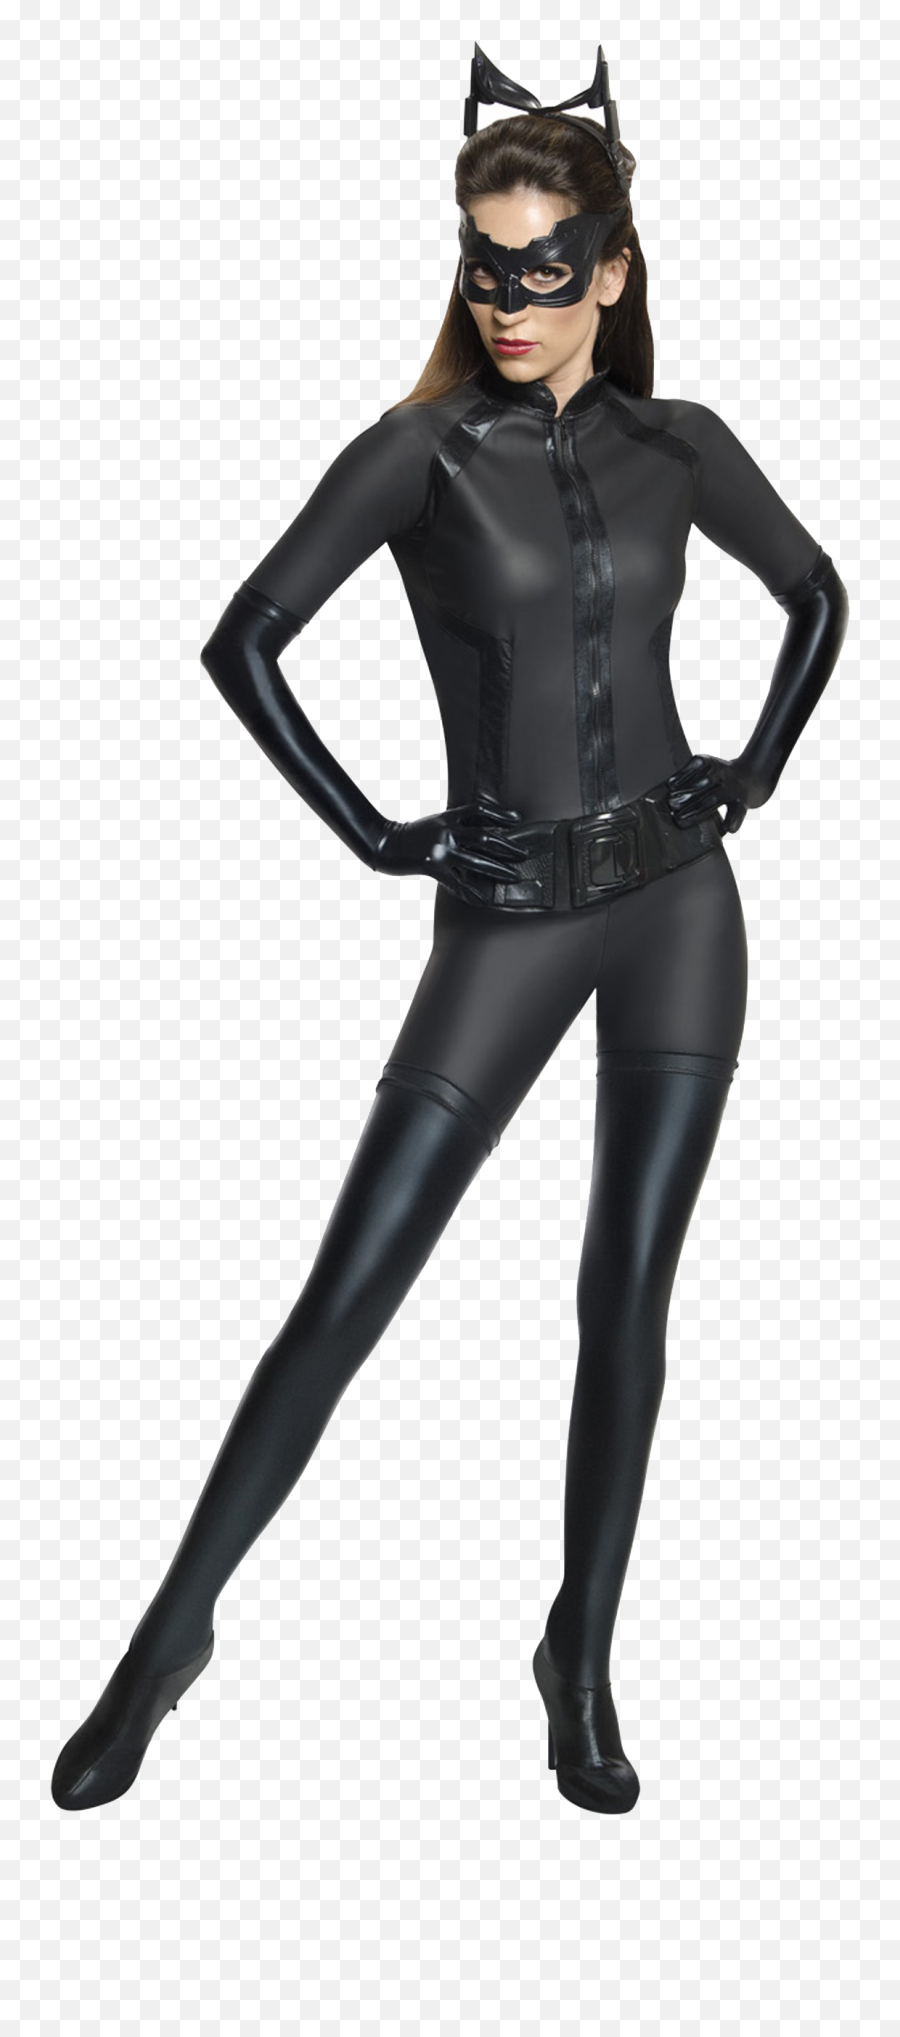 Catwoman Png - Cat Woman Dress Up 653930 Vippng Anne Hathaway Costume Catwoman,Catwoman Png